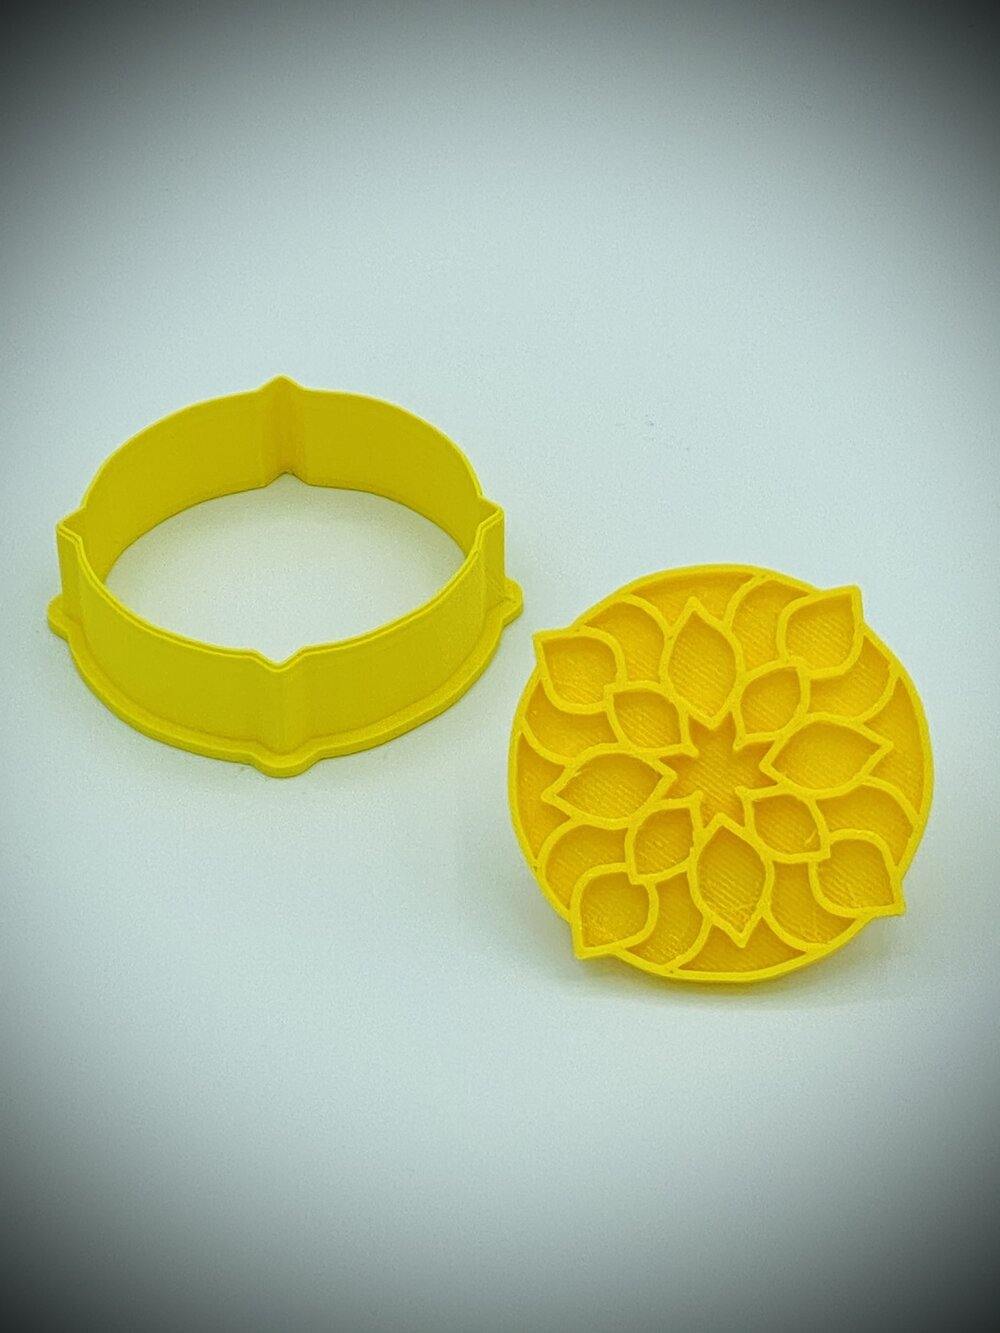 Floral Mandala Stamp And Cutter #1-Stamps/Textures-seb3dcustomdesigns